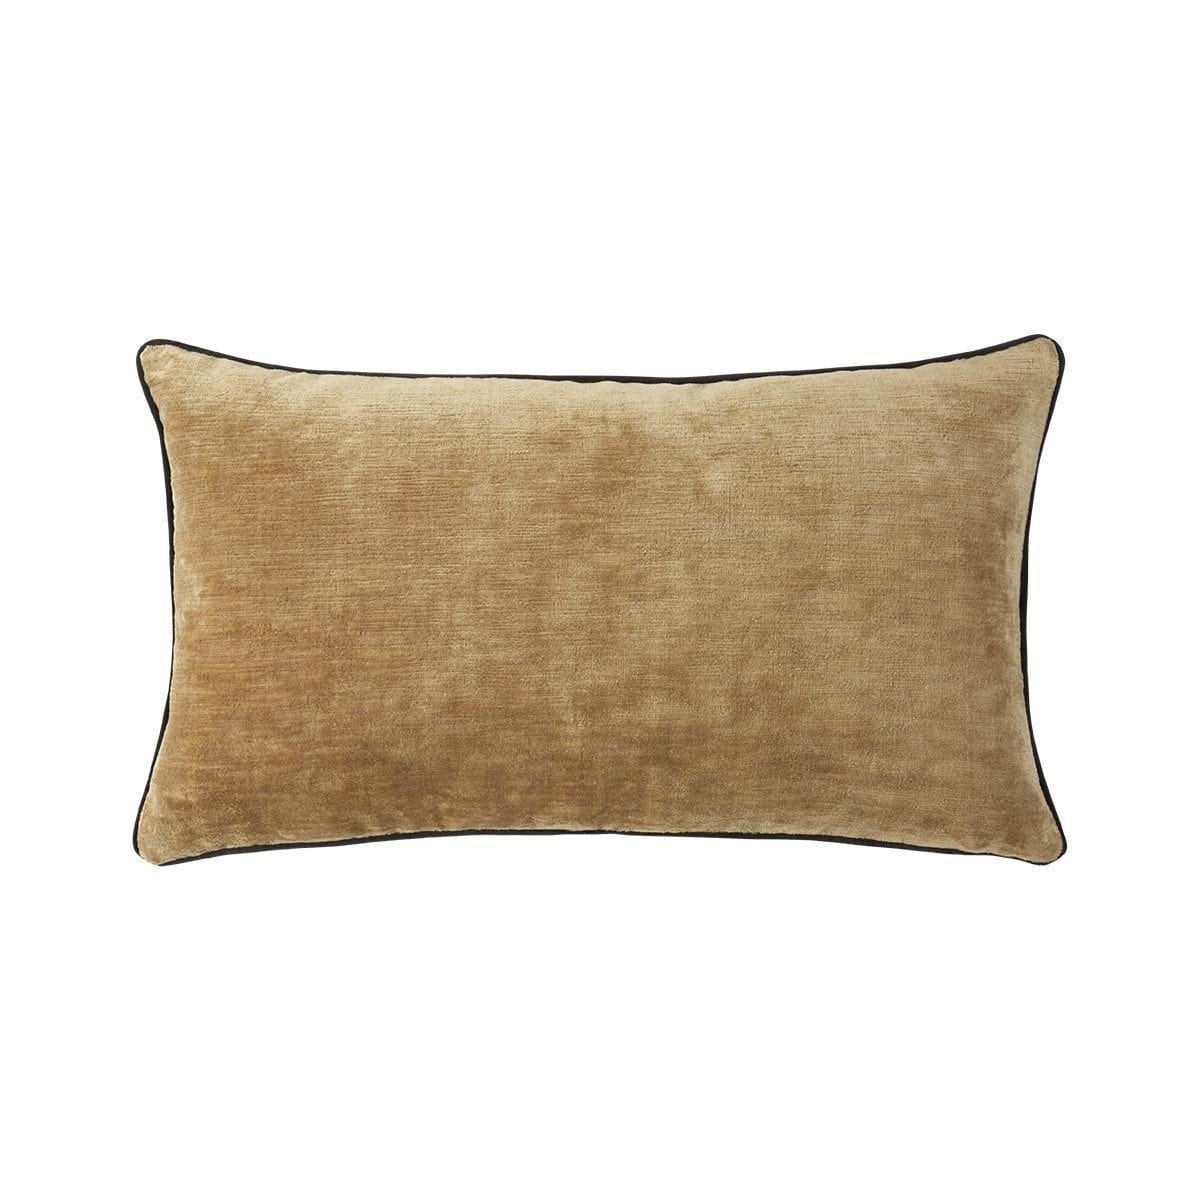 Decorative Pillows Iosis Boromée Decorative Pillow by Yves Delorme Daim (Wheat) / 13 x 22 in Yves Delorme